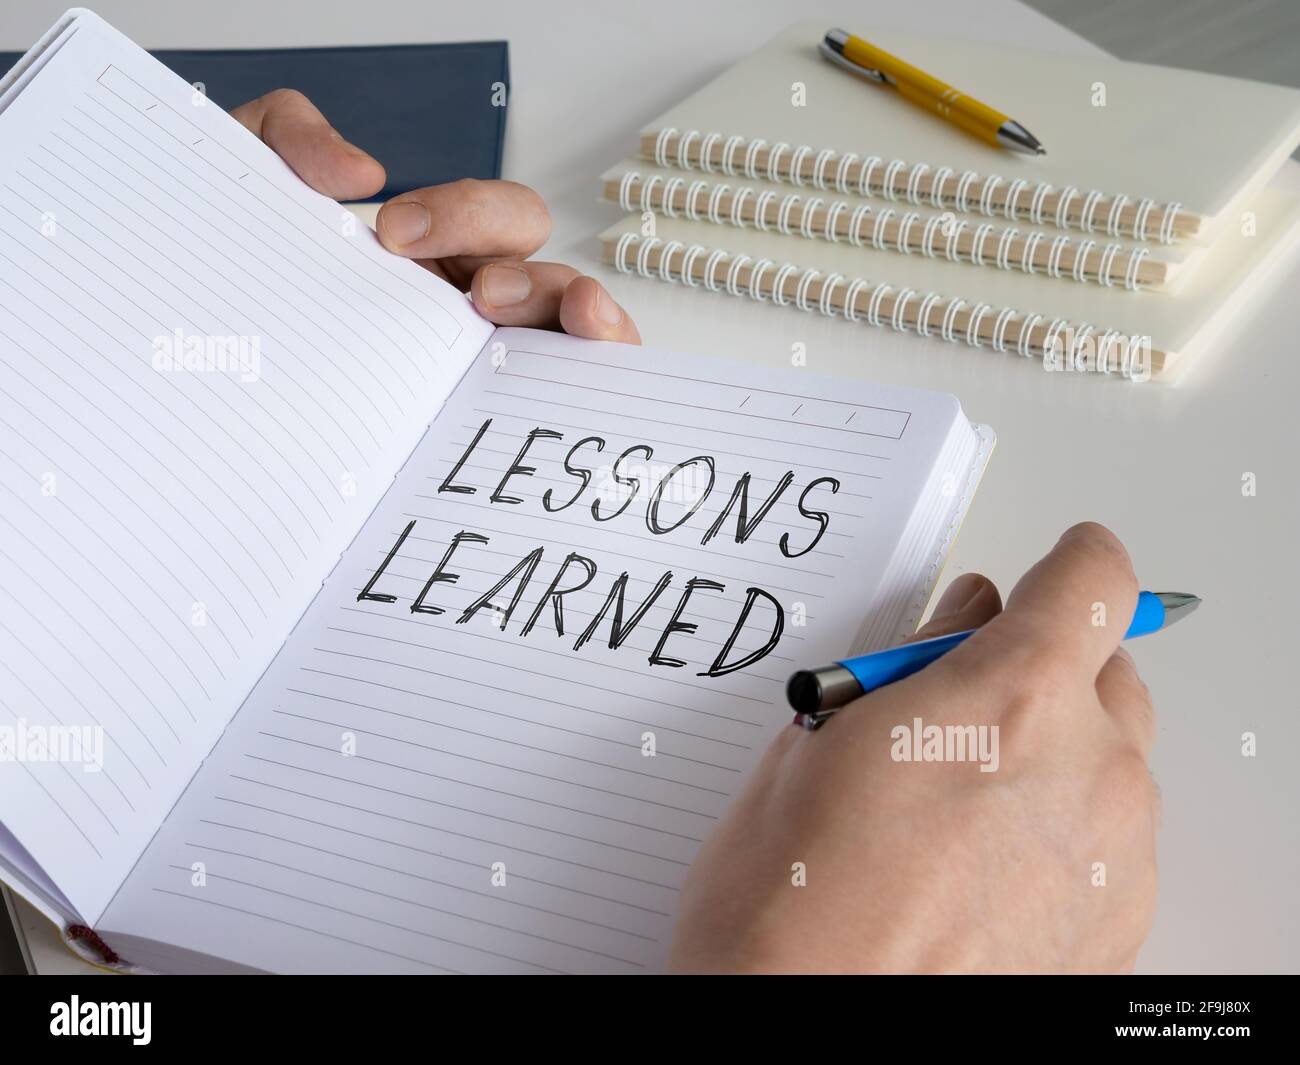 Lessons learned concept. The man made a diary entry. Stock Photo